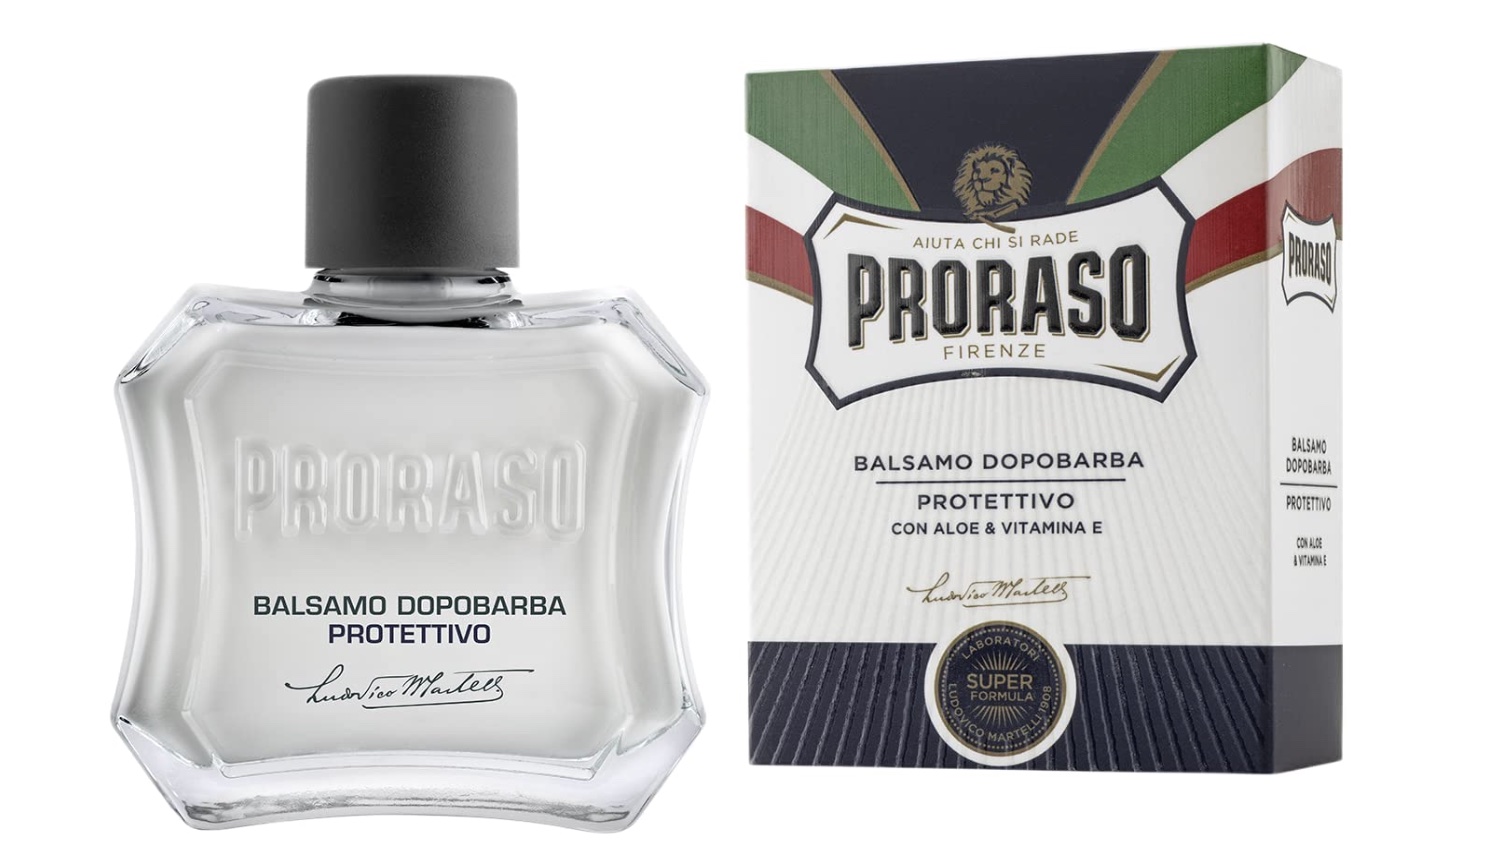 bottle and box display of Proraso aftershave